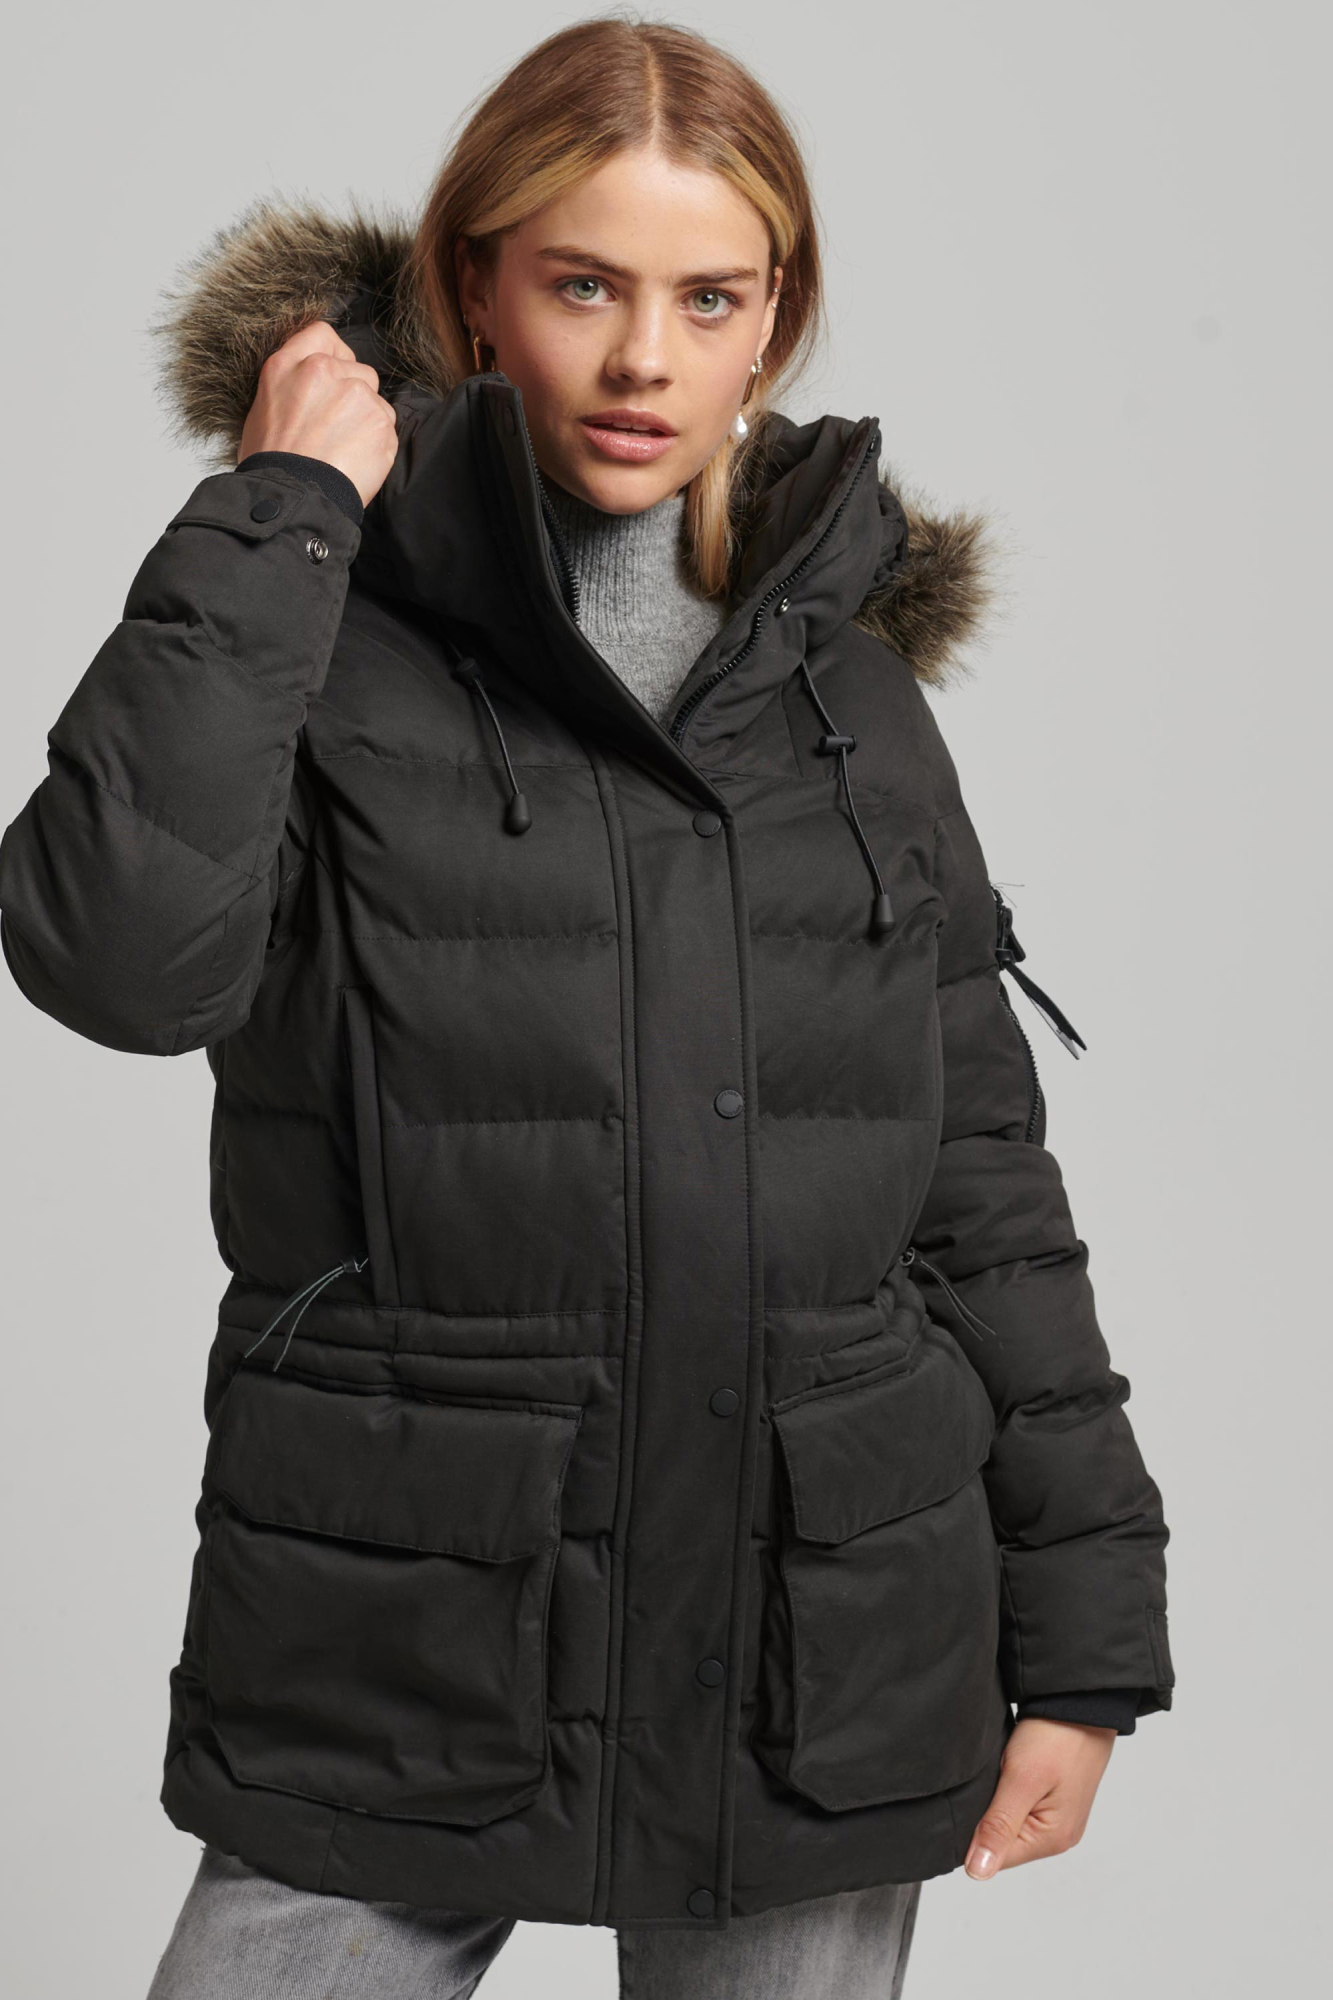 Superdry Womens Microfibre Expedition Parka Black - Size: 14